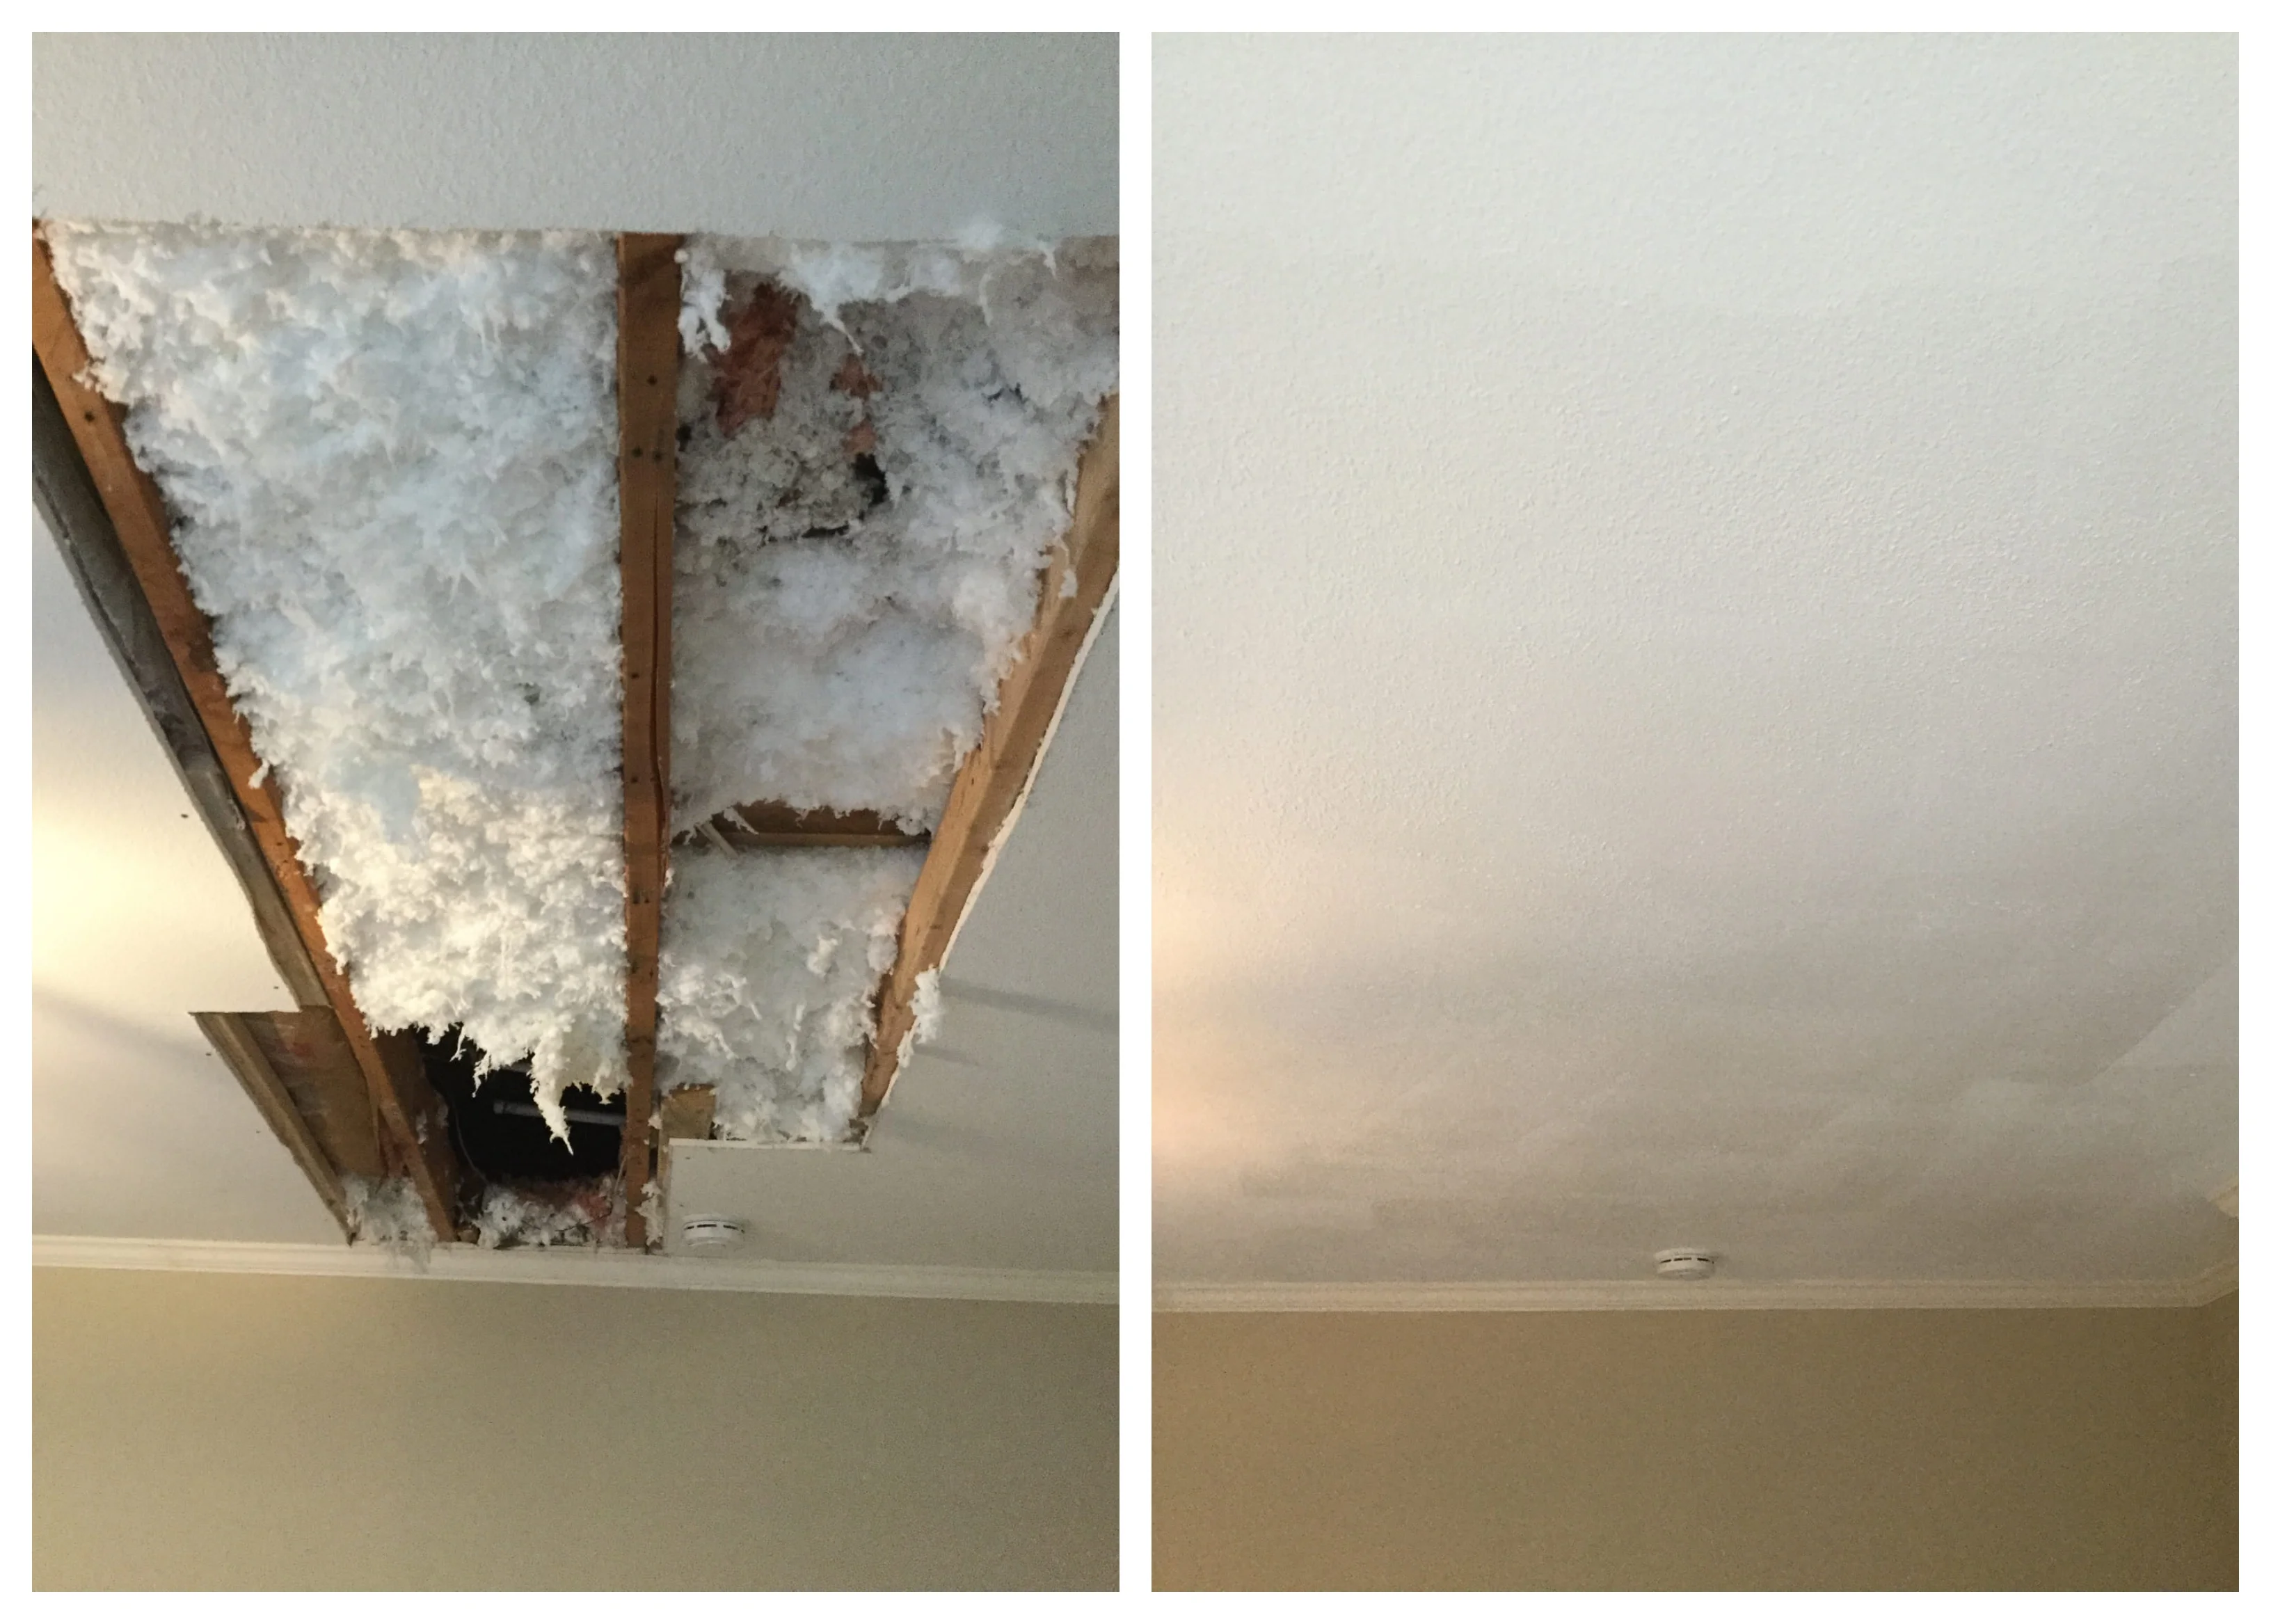 A hole in a drywall ceiling before and after it has been repaired and refinished by a handyman in Richardson, TX.